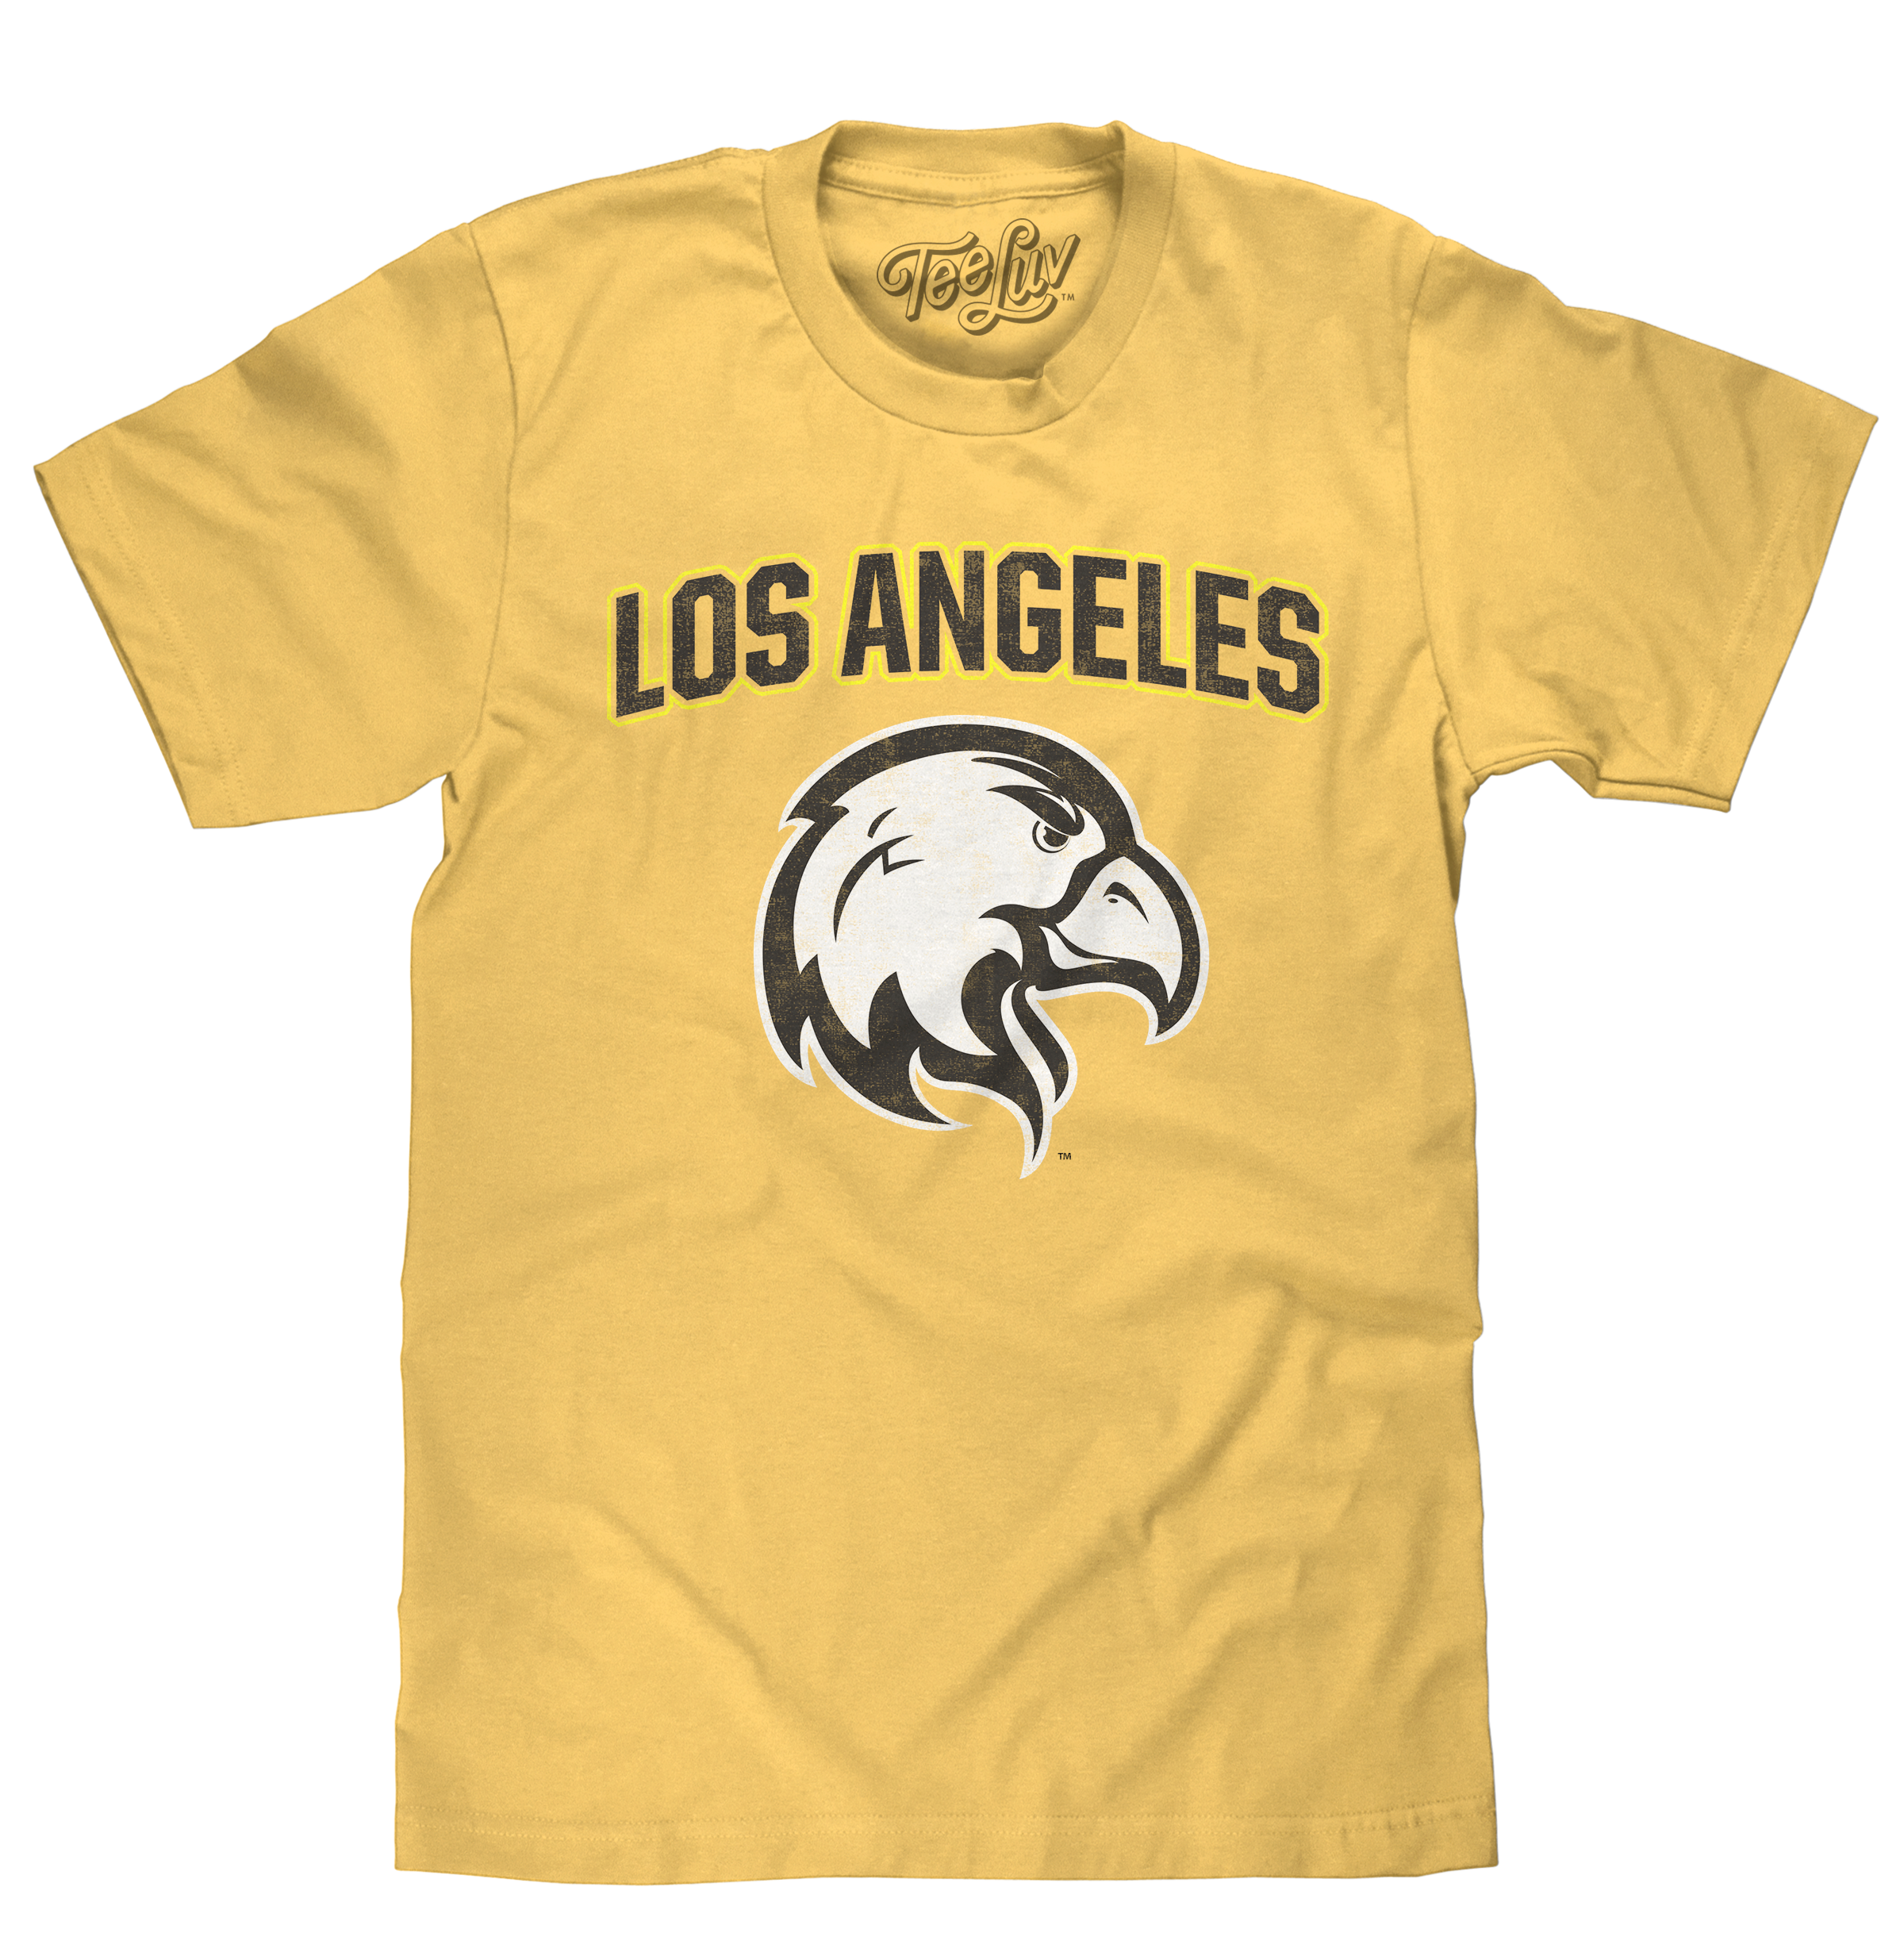 Tee Luv California State University Los Angeles Golden Eagles T-Shirt - Yellow Small